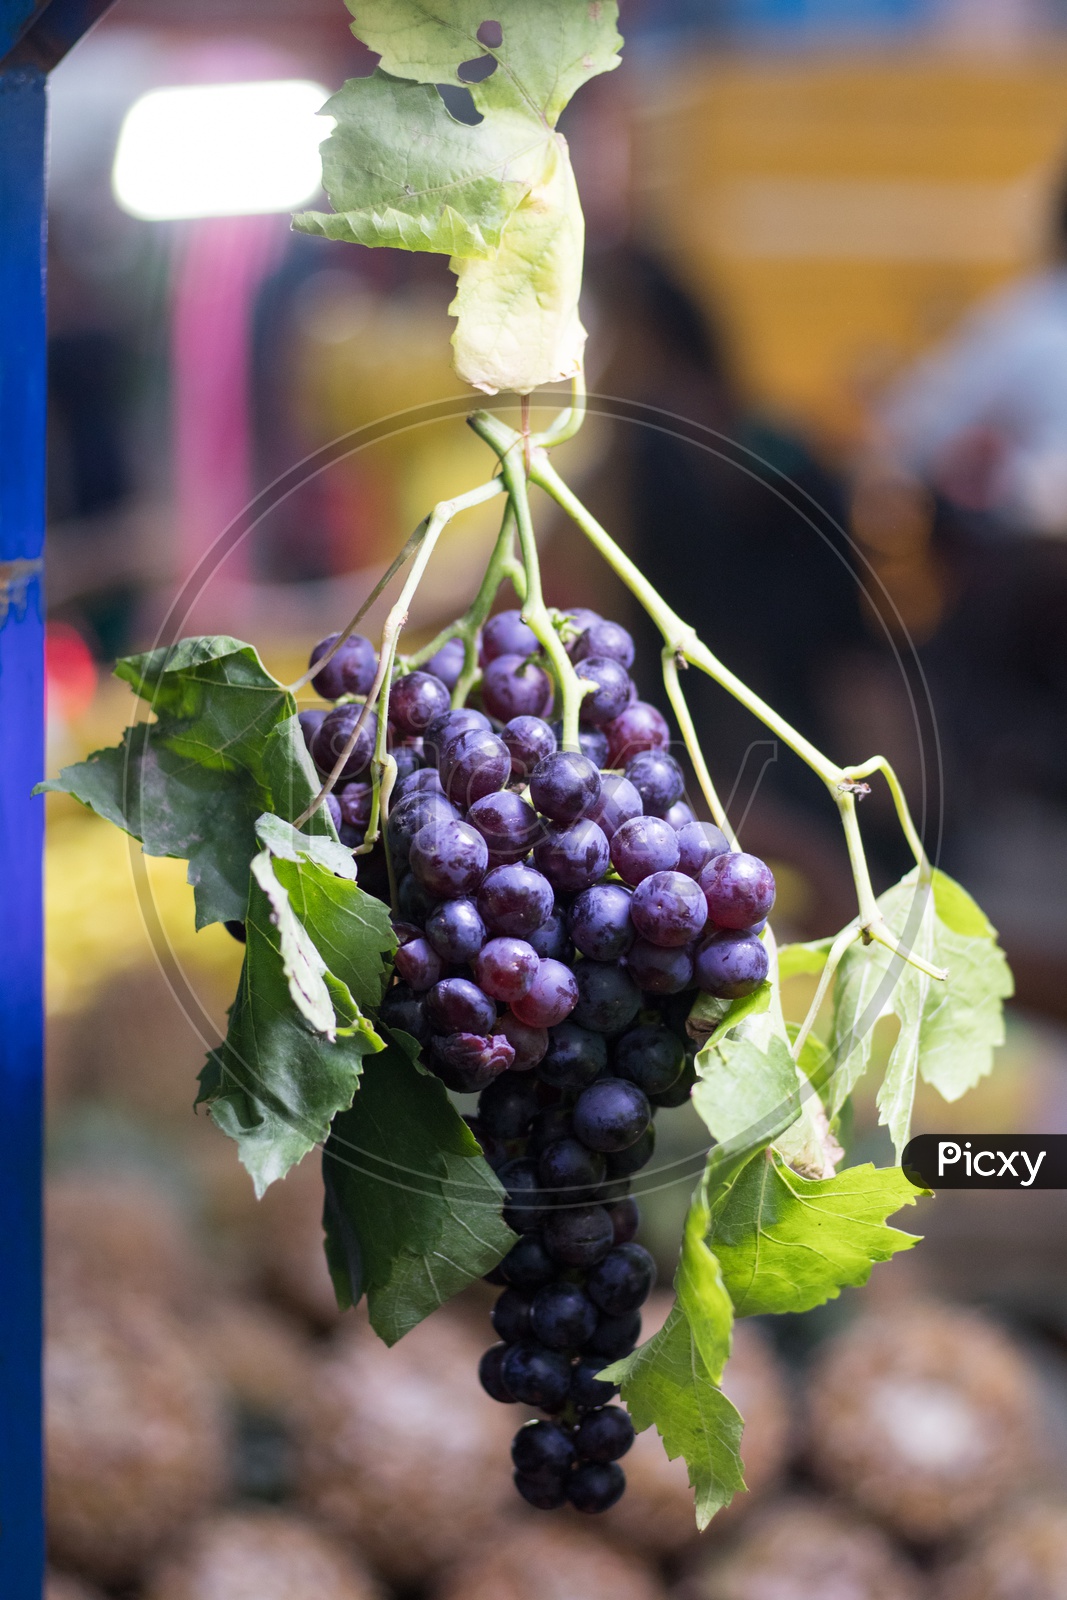 grapes in market